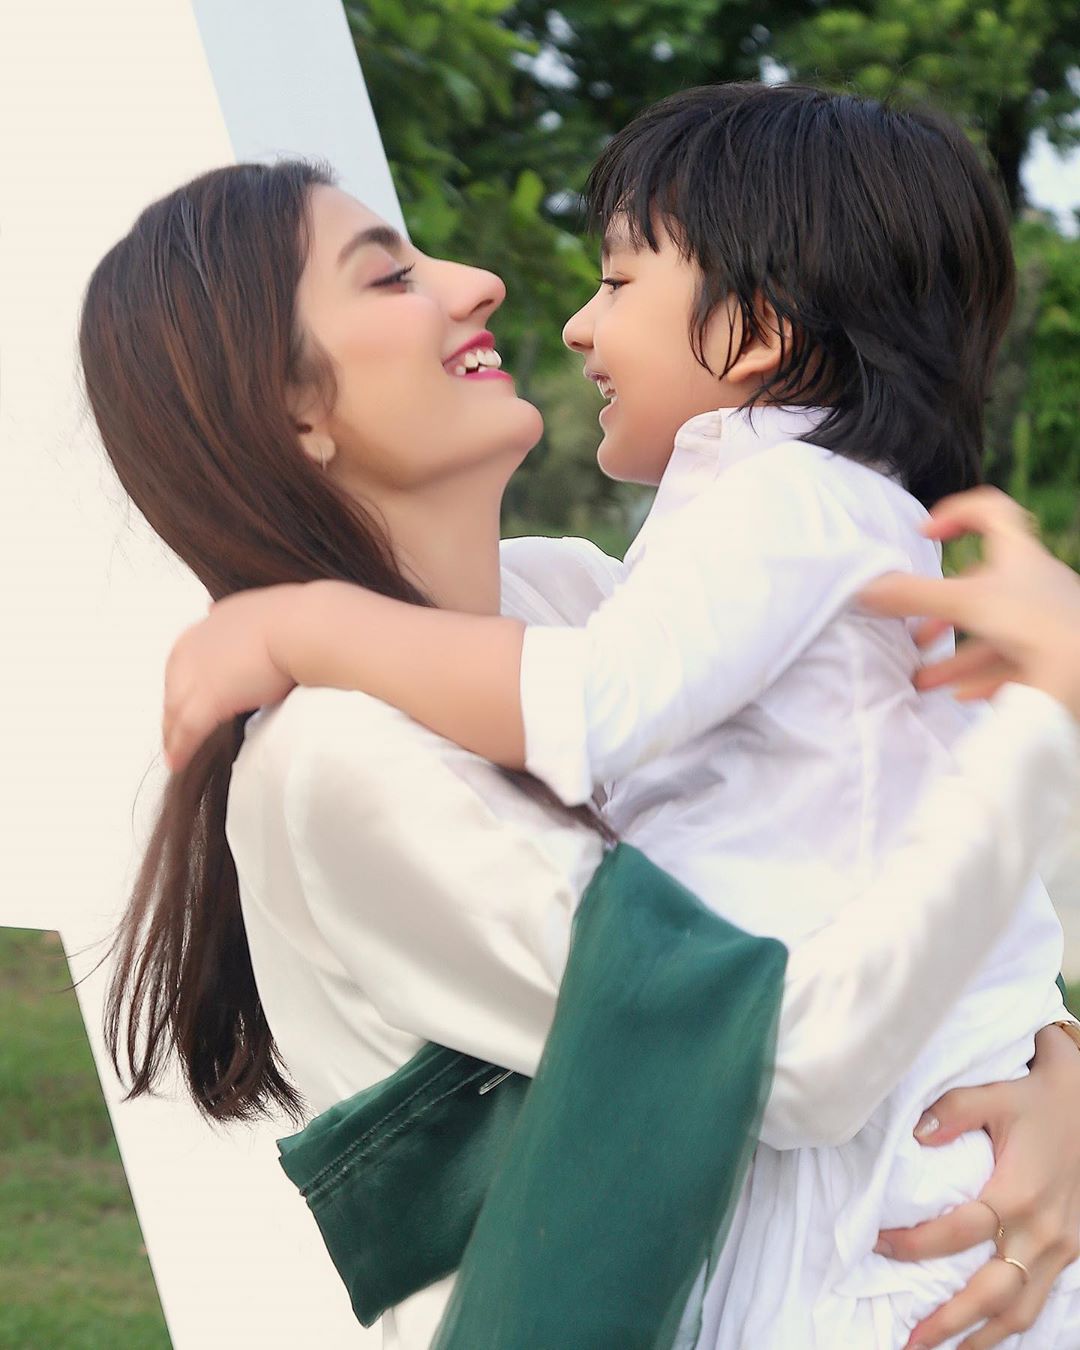 Bilal and Uroosa Qureshi Independence Day Pictures with Their Cute Son